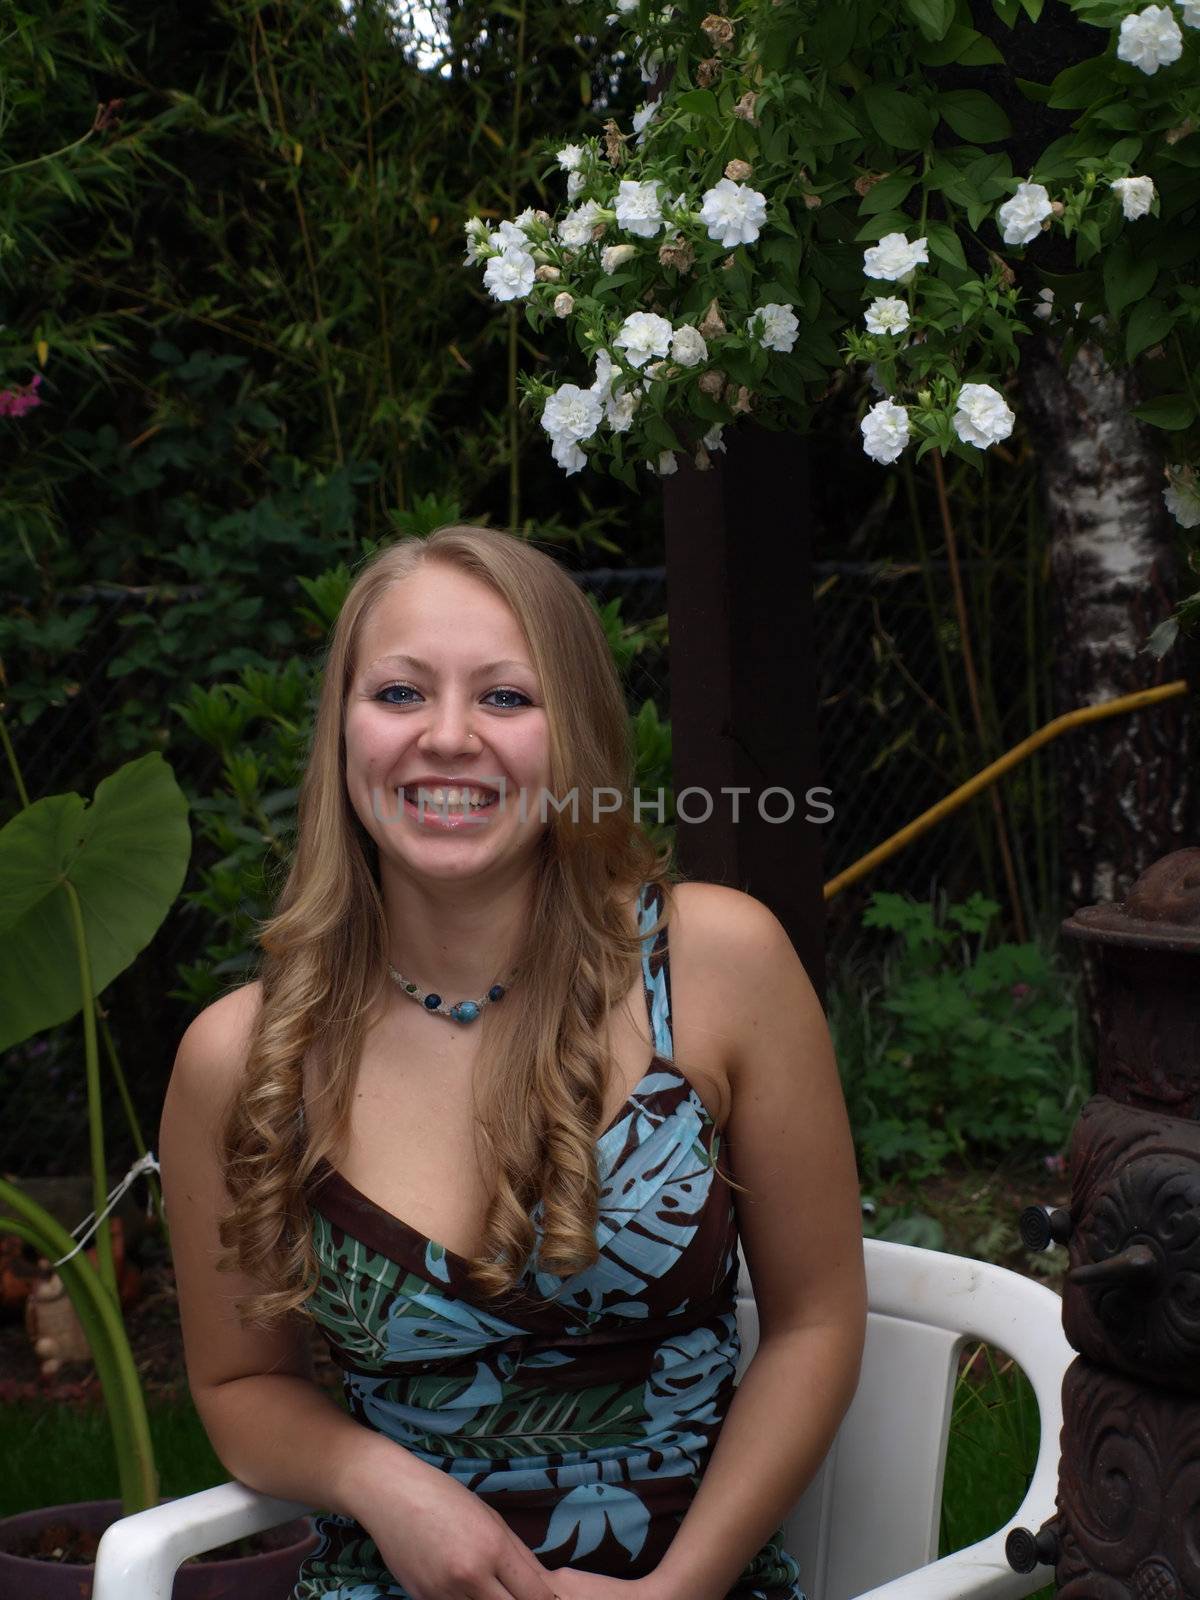 A smiling girl sits in a chair in the garden